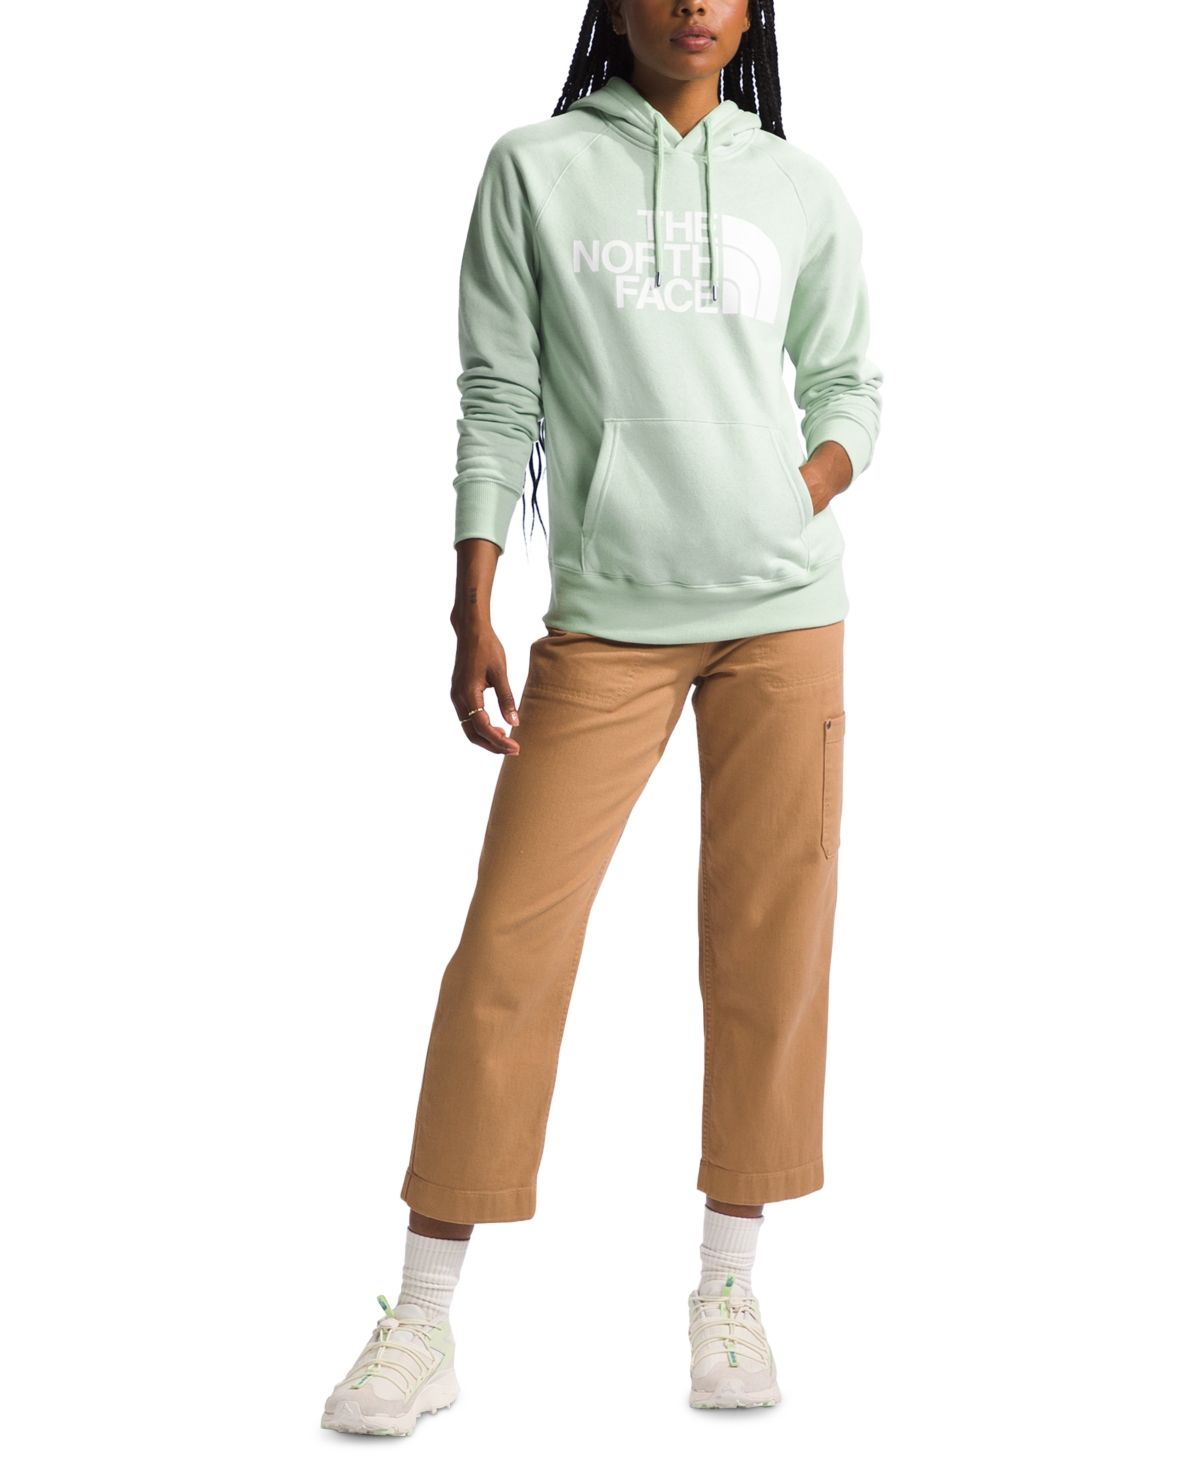 THE NORTH FACE WOMEN'S HALF DOME PULLOVER HOODIE